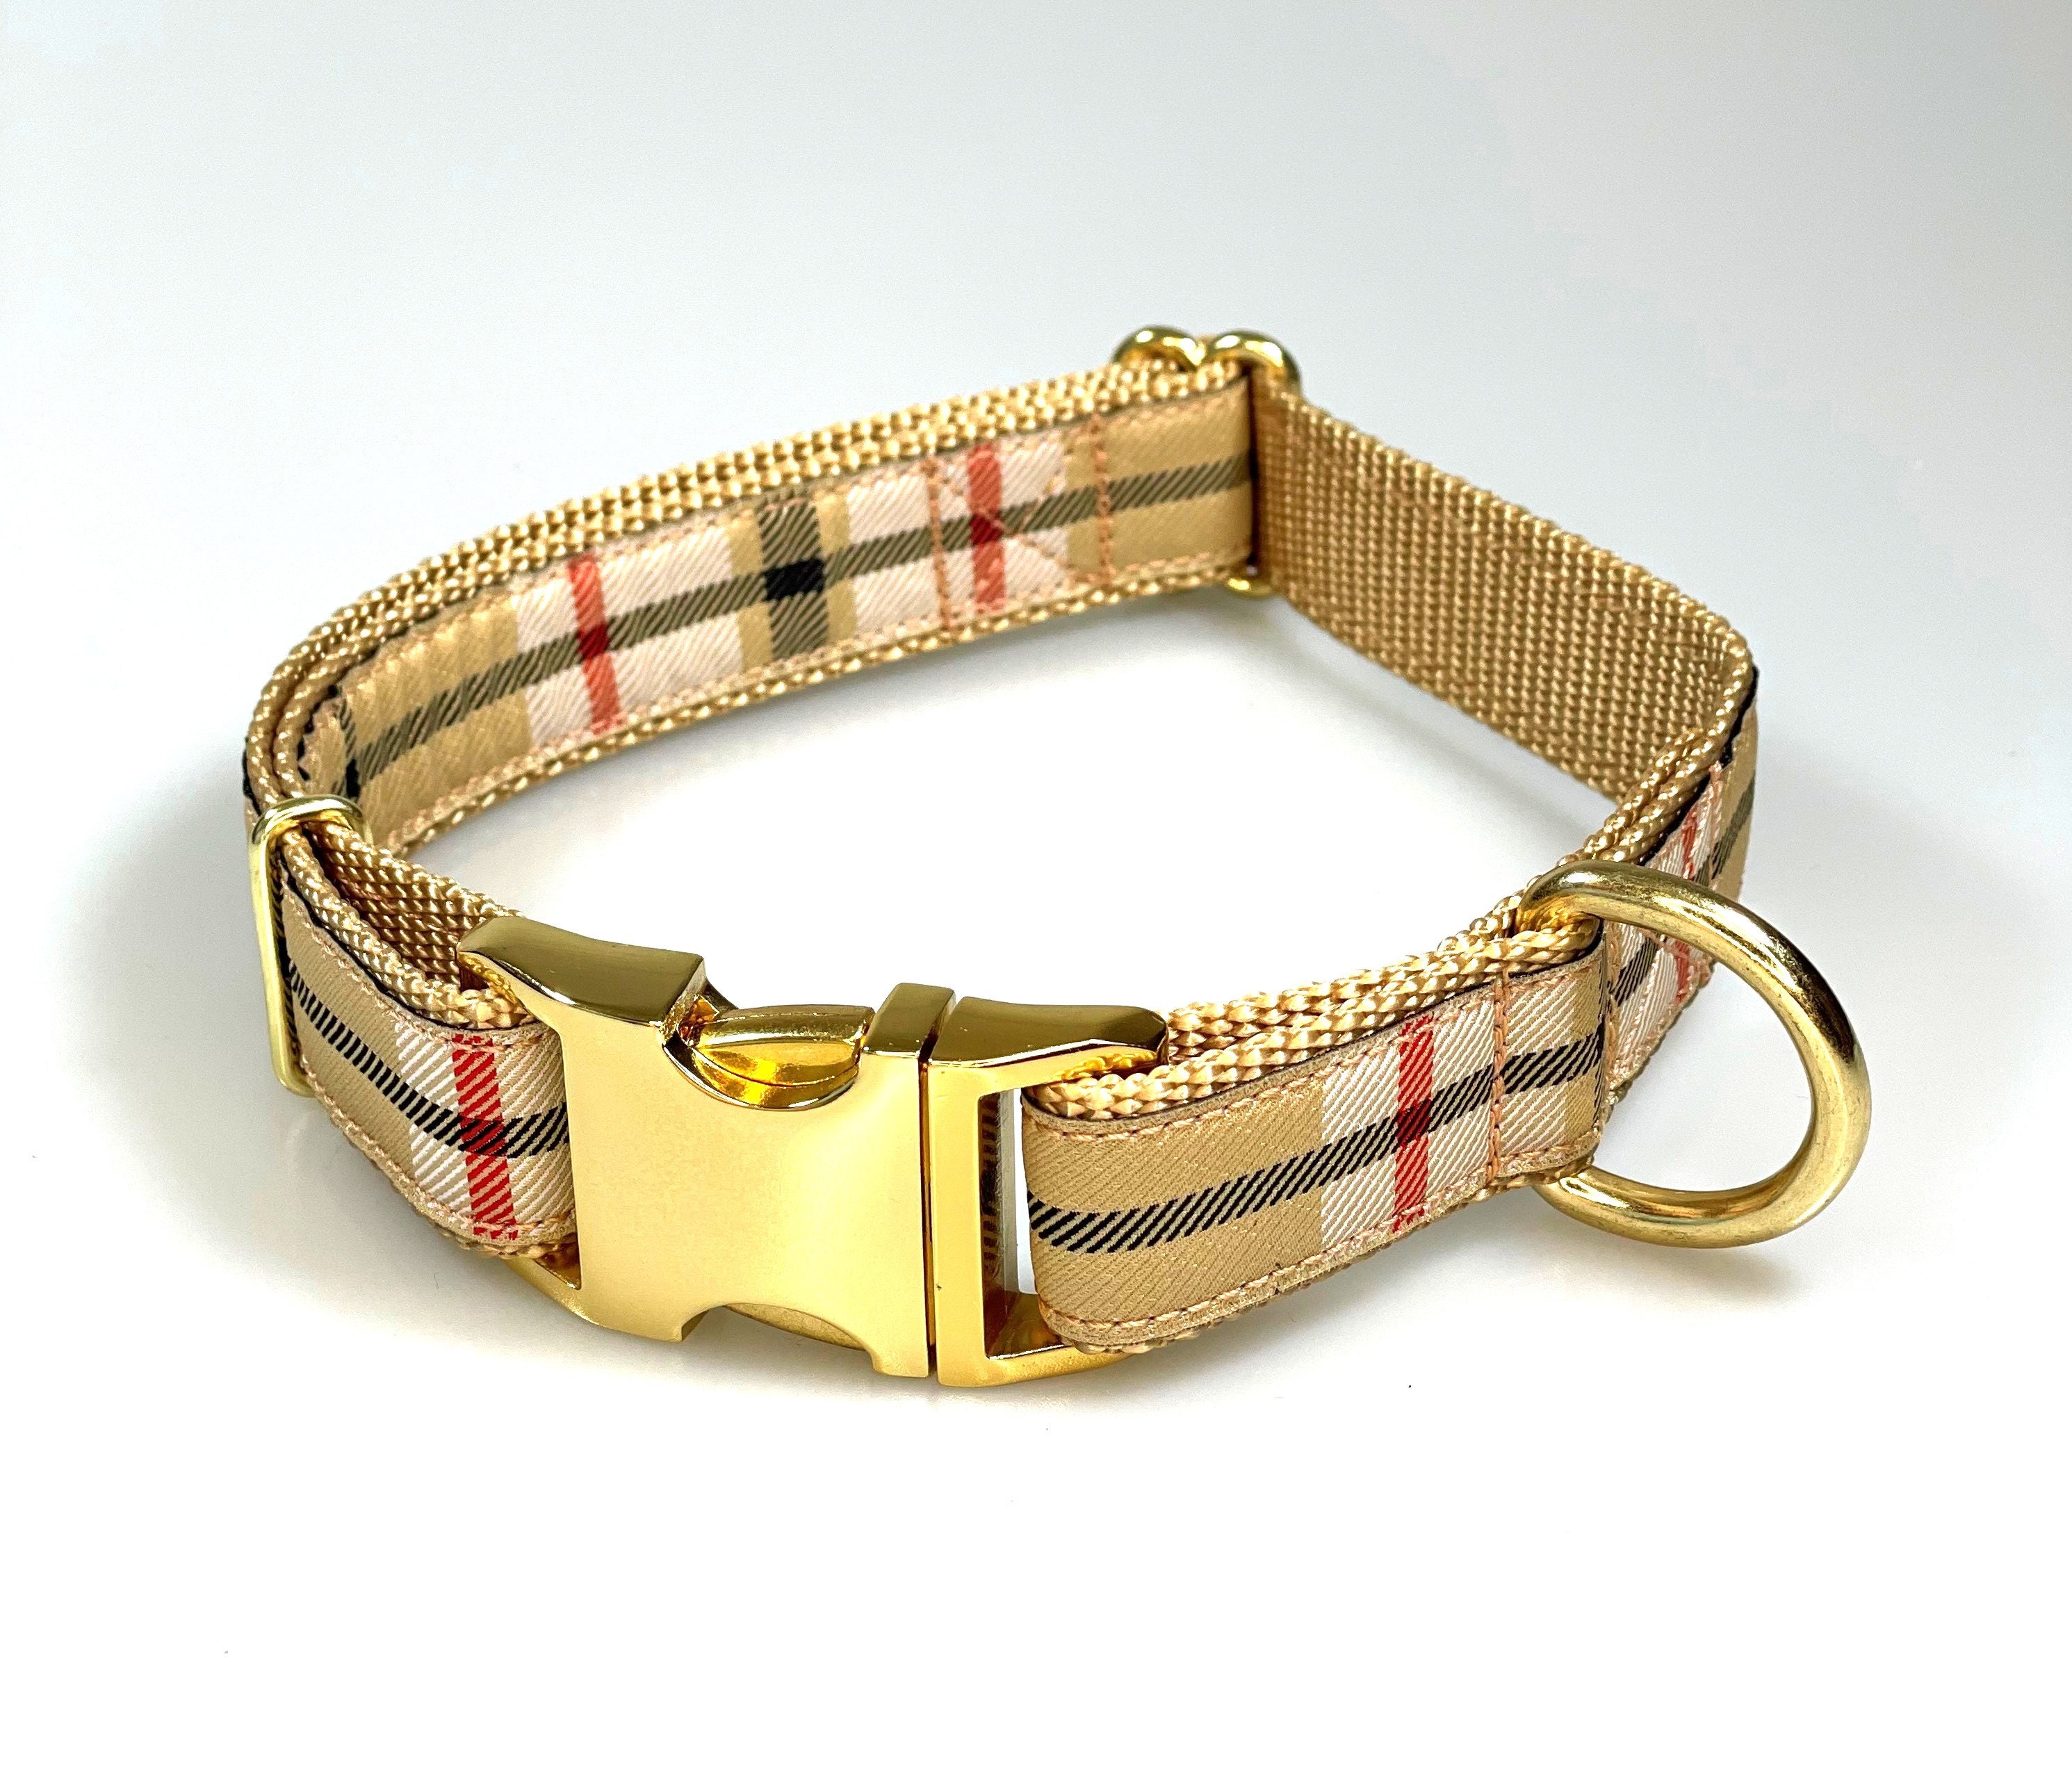 Burberry with Metal Horse Accessory Dog Collar and Leash - Royal